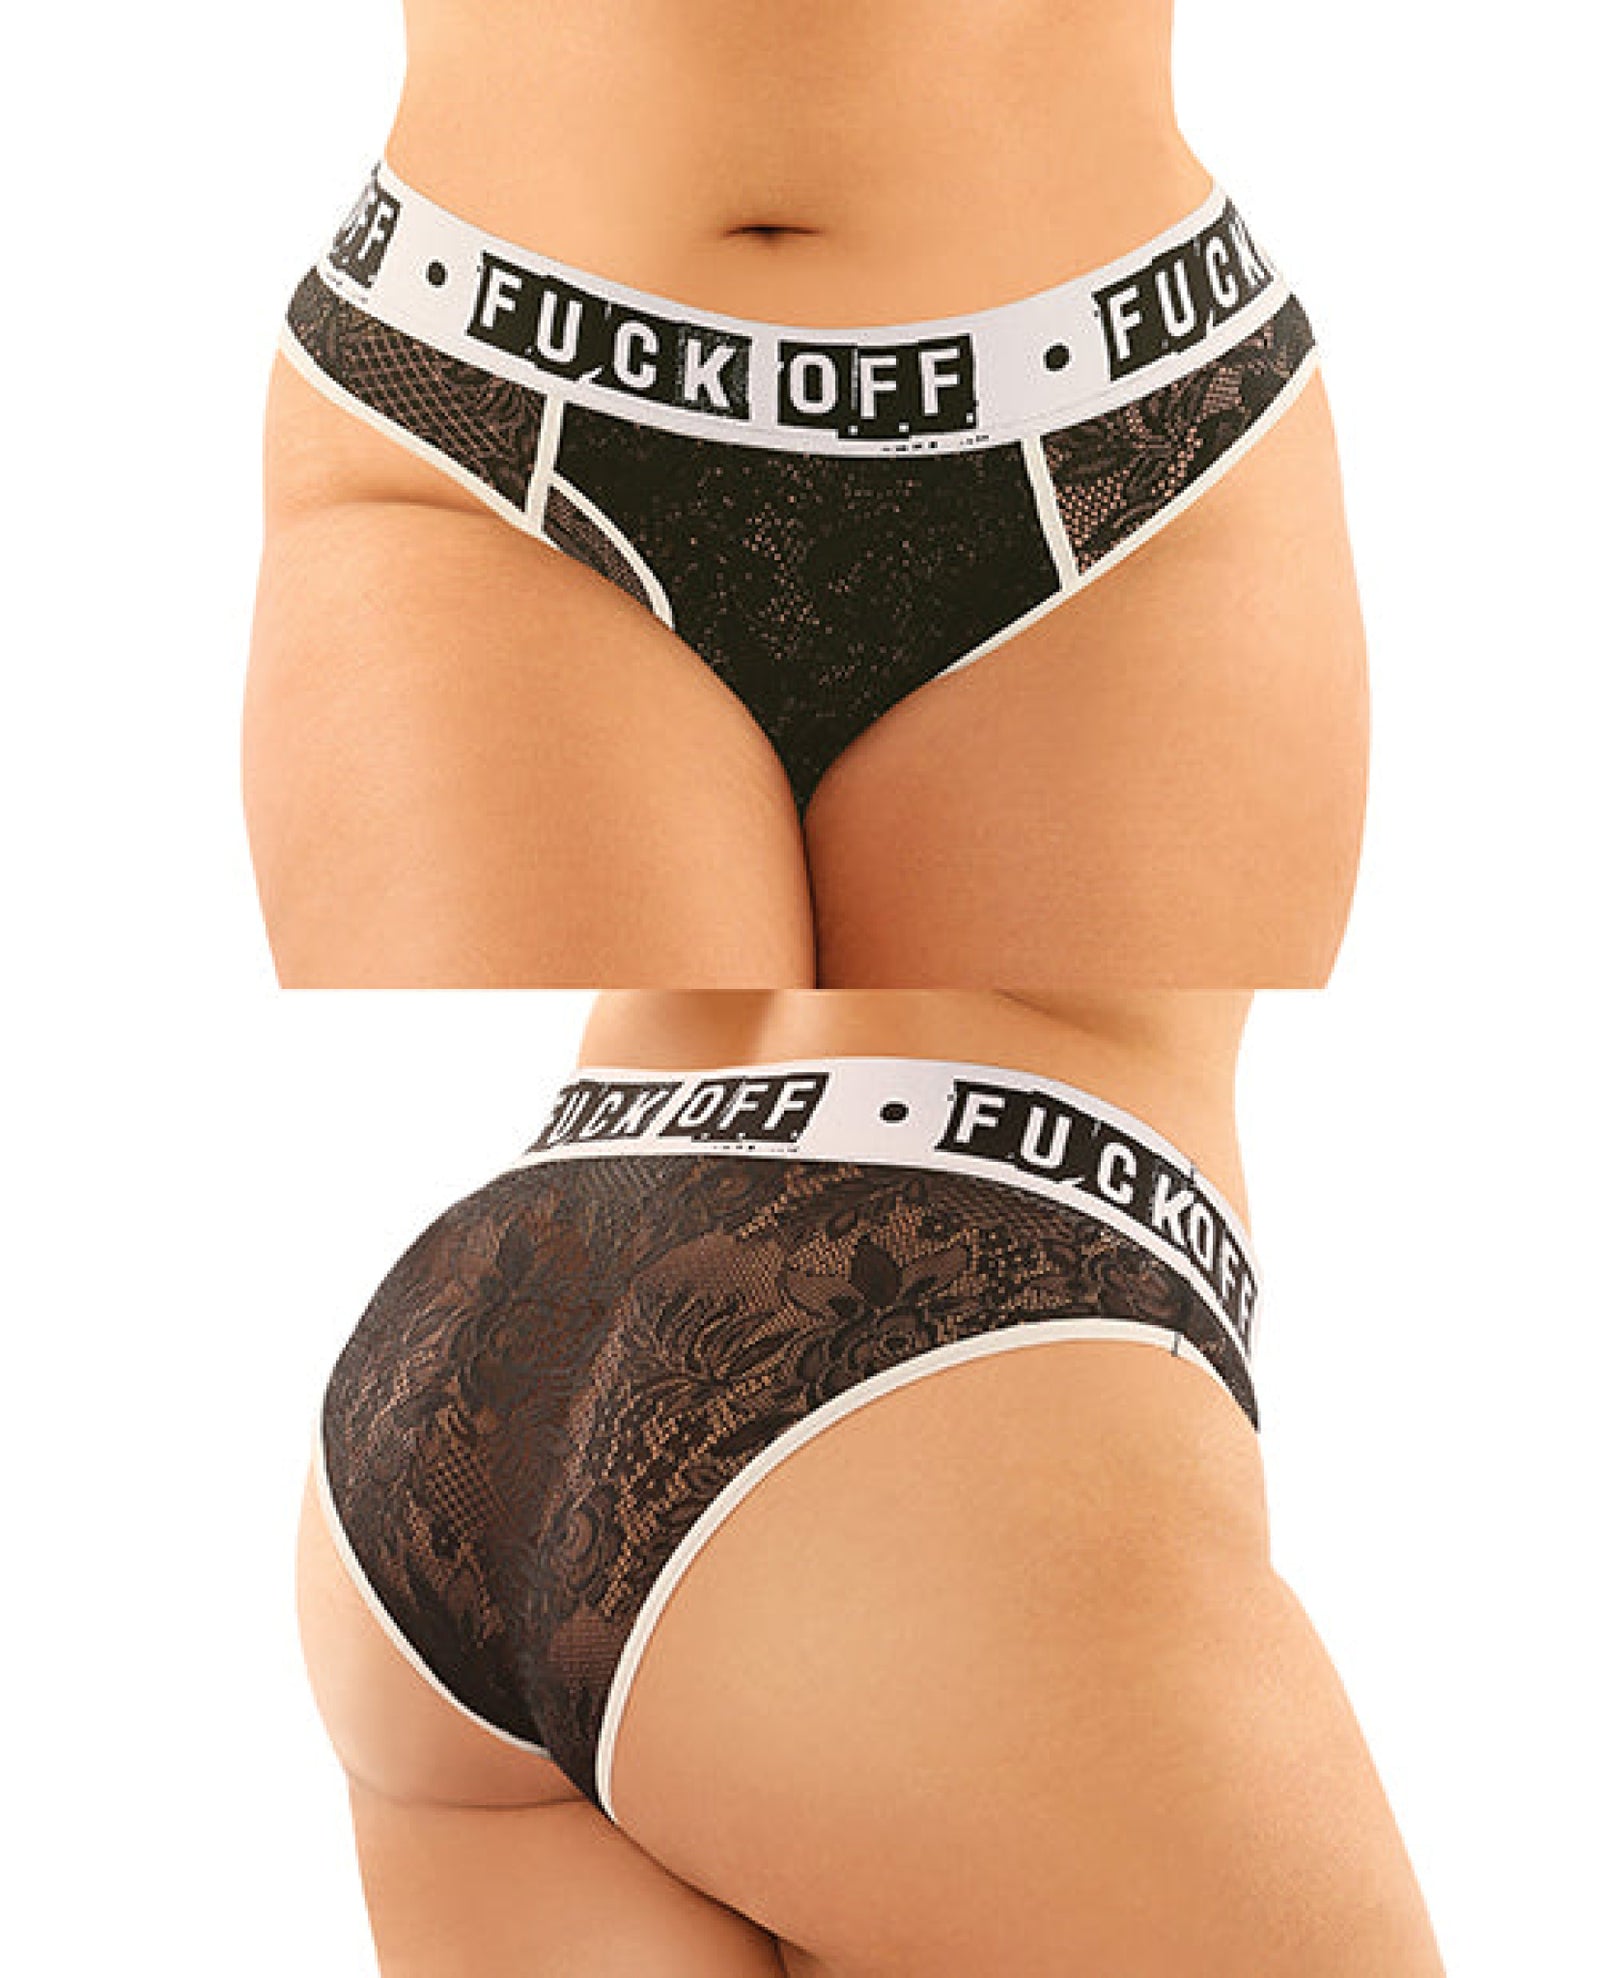 Vibes Buddy Fuck Off Lace Boy Brief & Lace Thong Black Qn Fantasy Lingerie